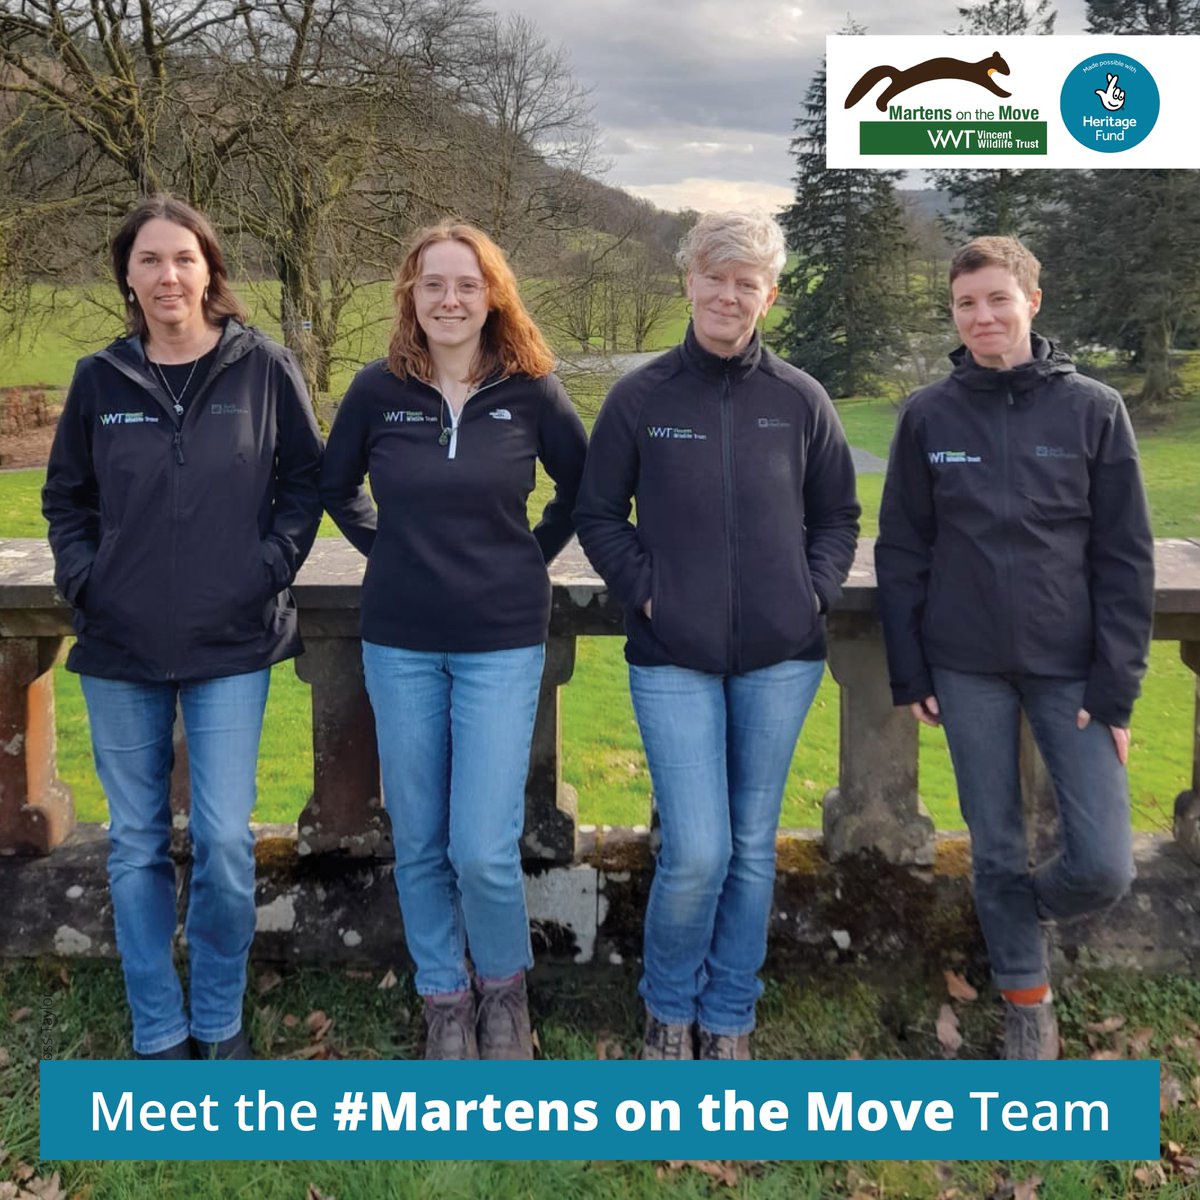 Welcome to #MartensOnTheMove Team (l-r) Dr Stephanie Johnstone, Project Manager; Rowie Burcham, Comms+Engagement Officer; Victoria Chanin, Project Officer+Lucy Nord, Project Officer – all excited to work with vols+communities to help pine martens thrive in Britain @HeritageFundUK